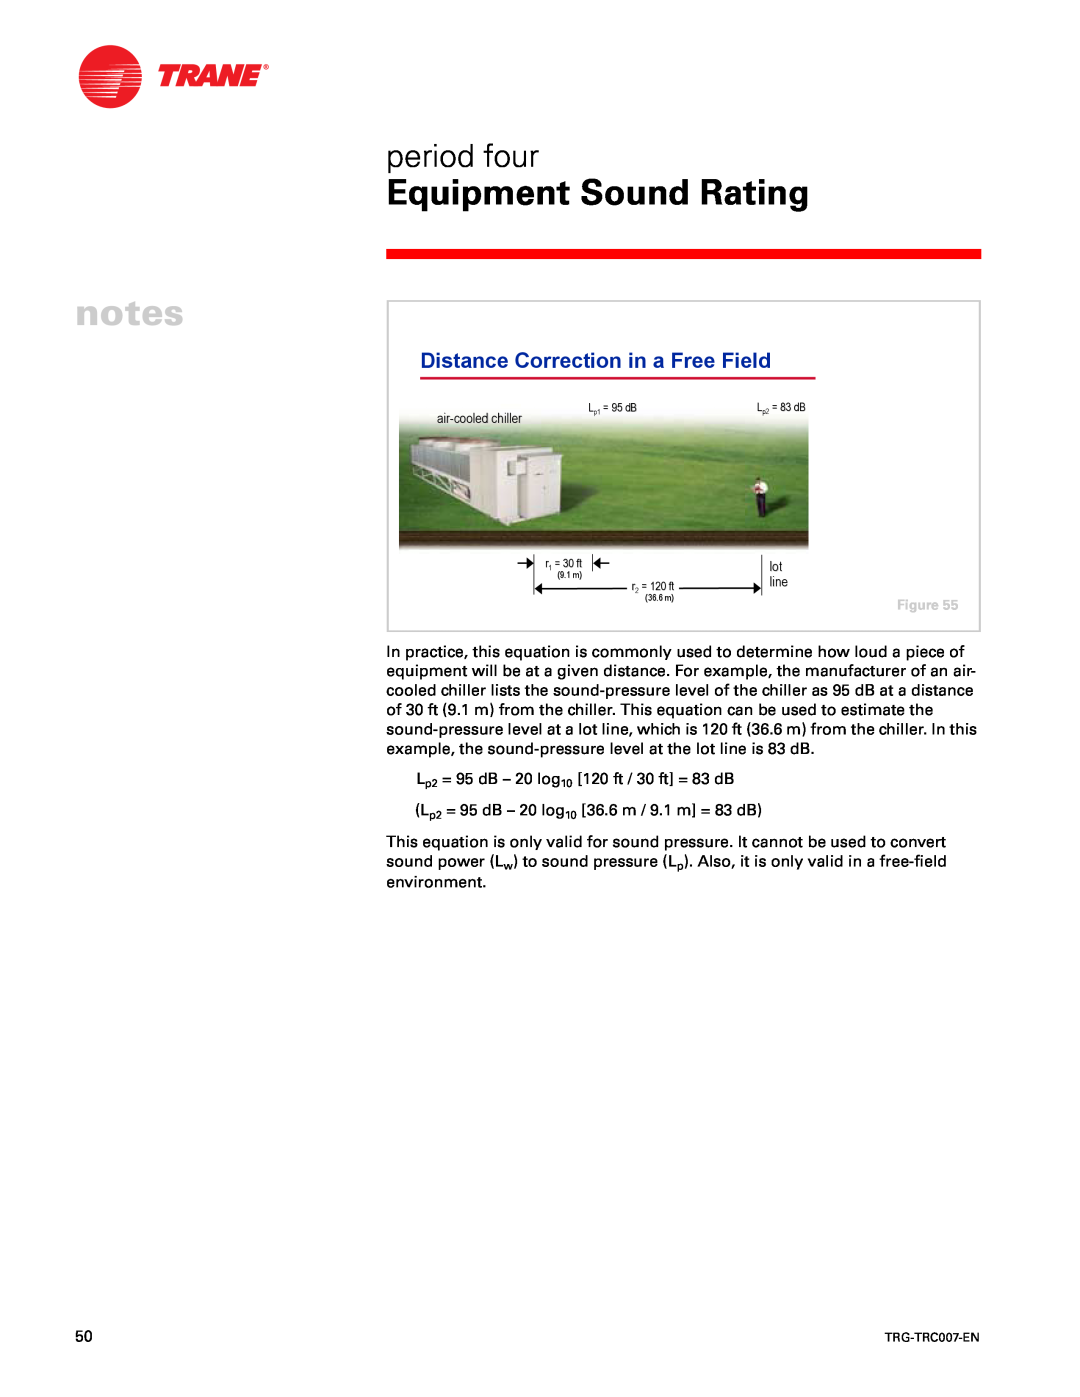 Trane TRG-TRC007-EN manual Equipment Sound Rating, period four, Distance Correction in a Free Field 